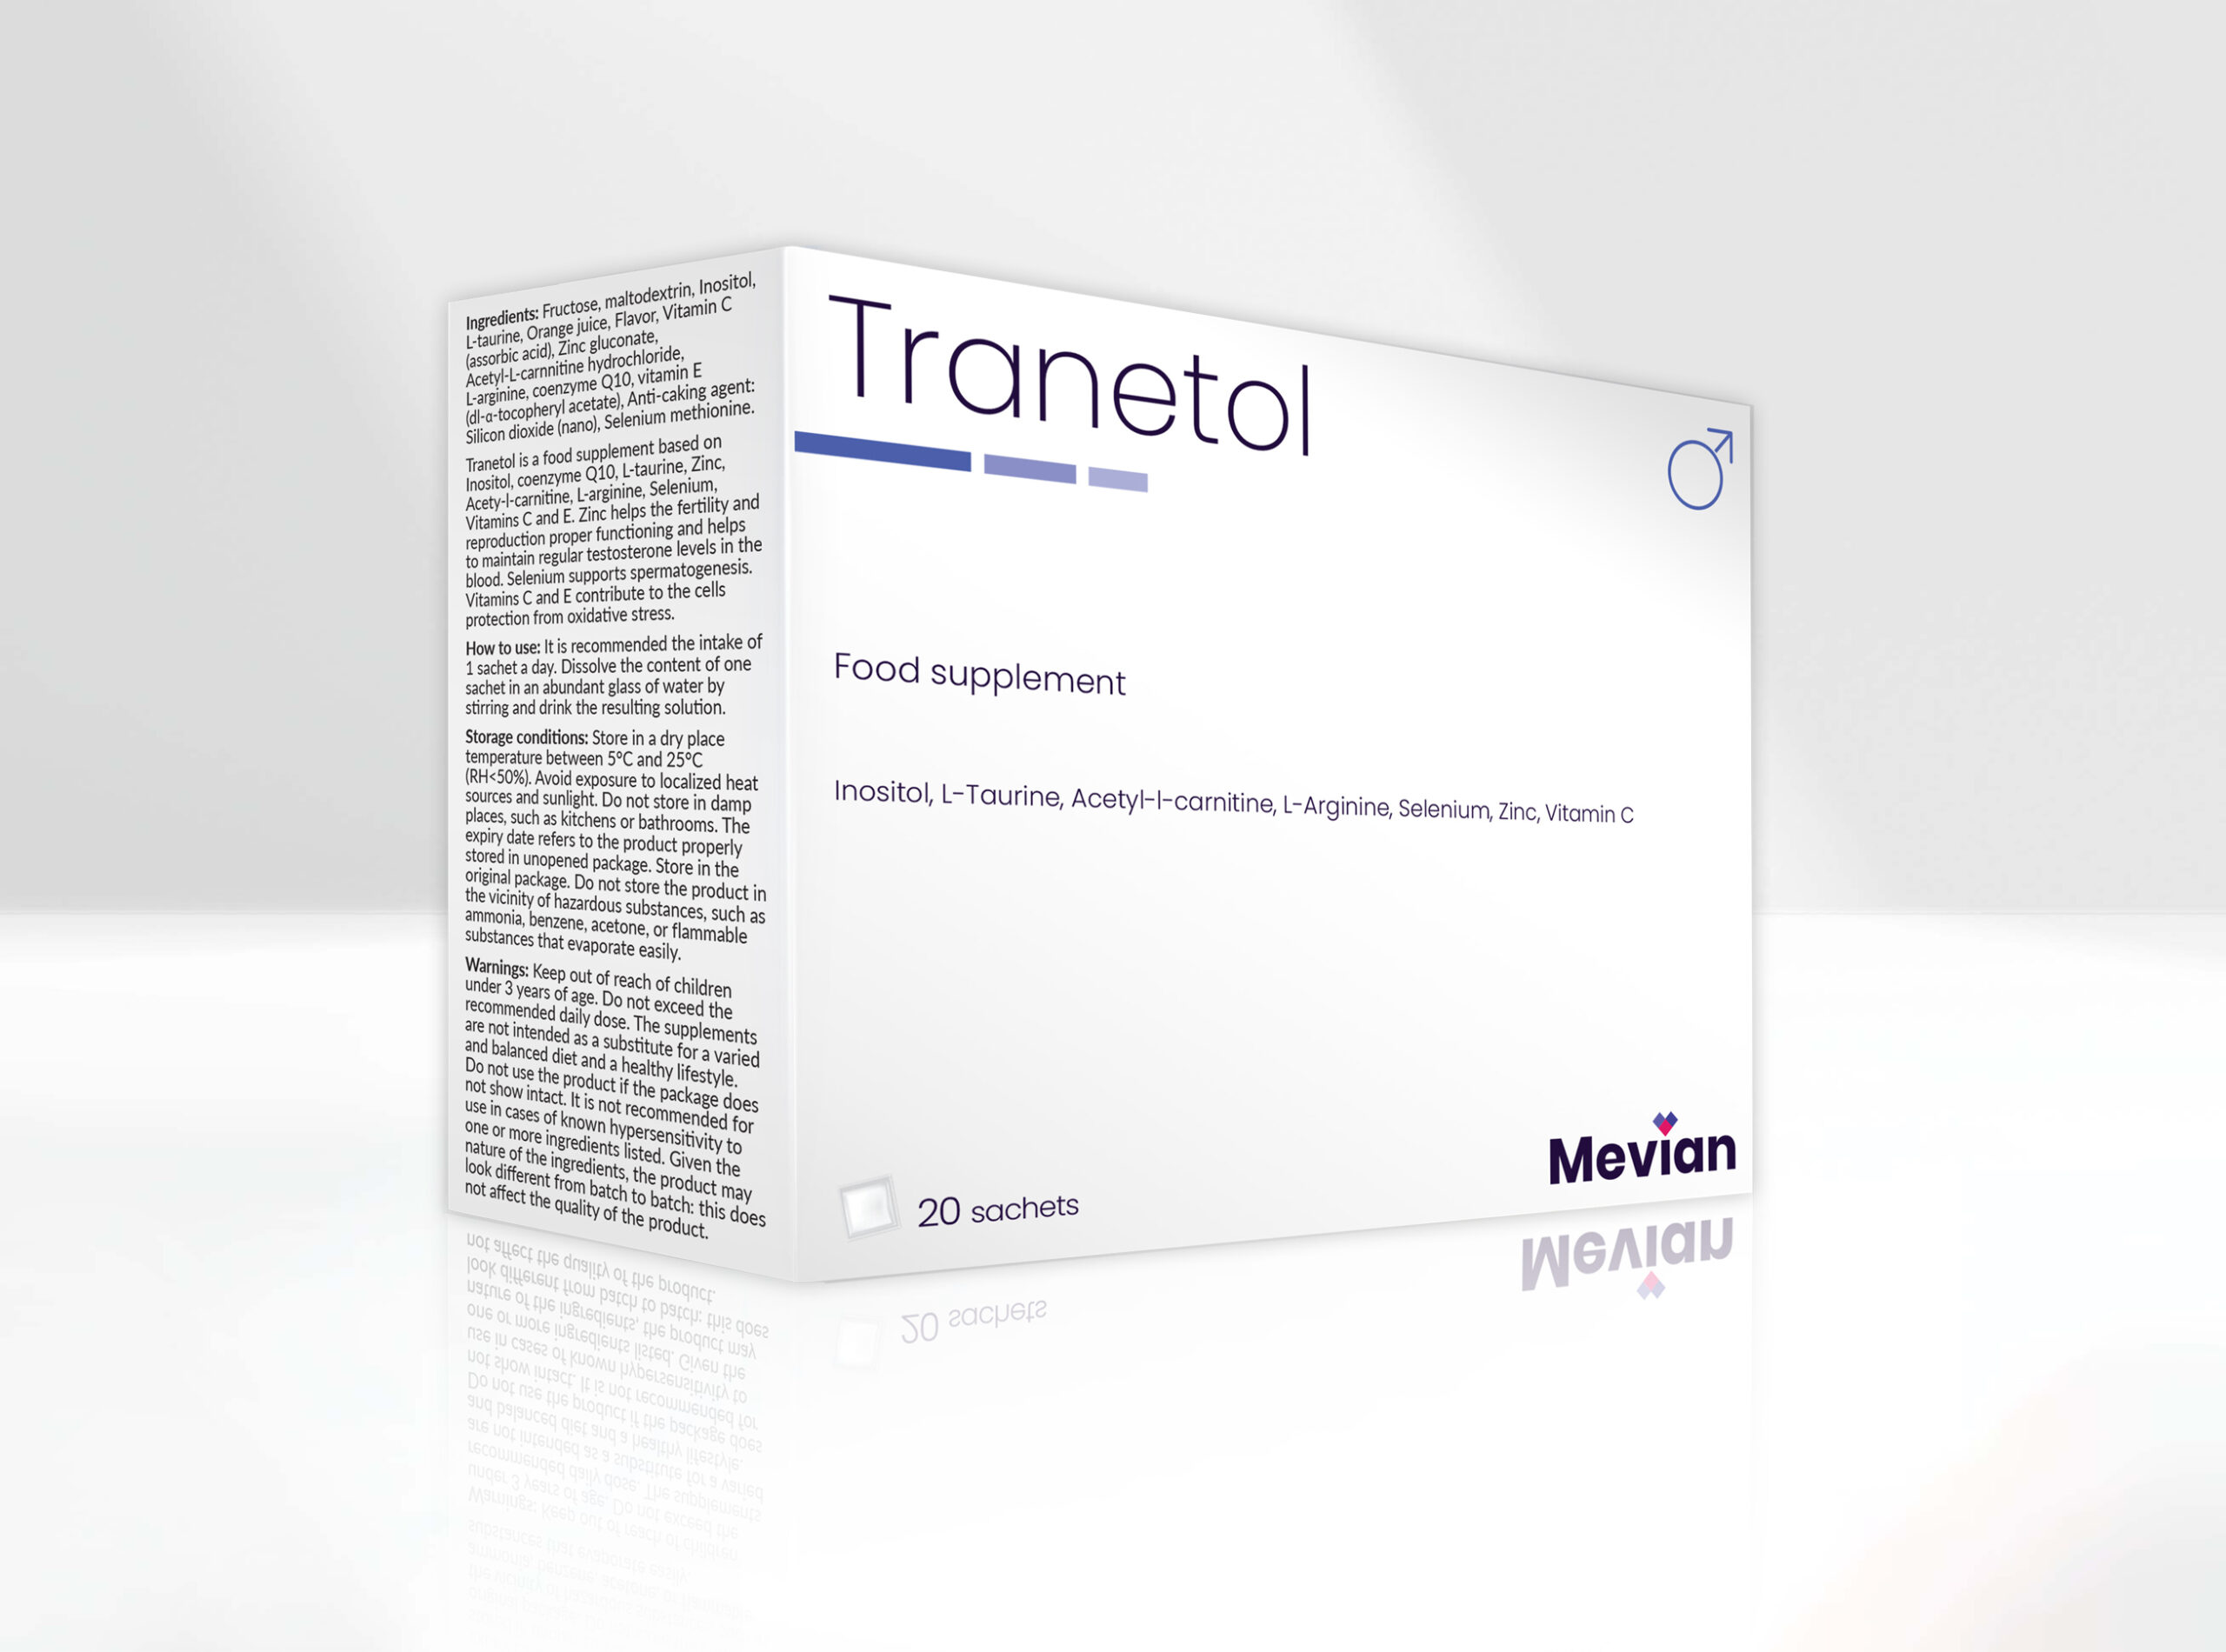 Tranetol helps the smooth functioning of fertility and reproduction and helps to maintain regular values  of testosterone in the blood. Ideal for spermatogenesis while contributing to the protection of cells from oxidative stress.